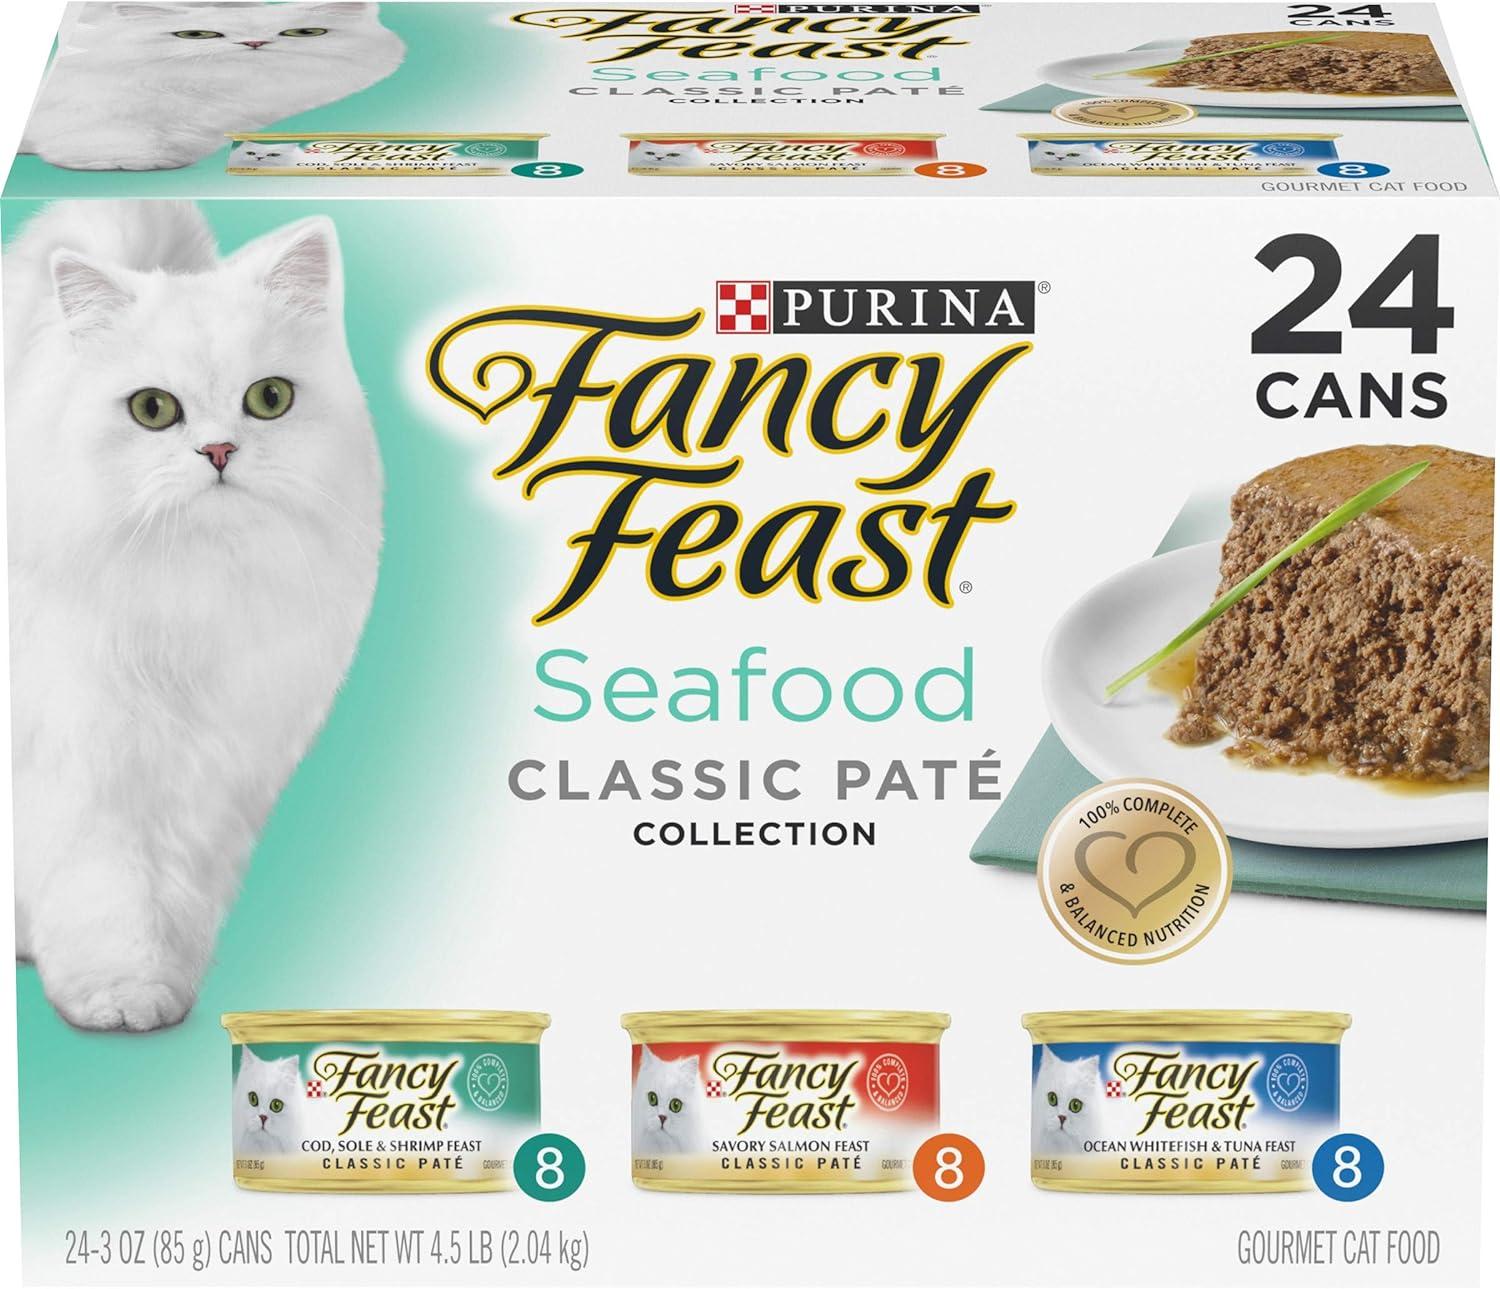 Purina Fancy Feast Seafood Classic Pate Collection 24 Pack for $14.15